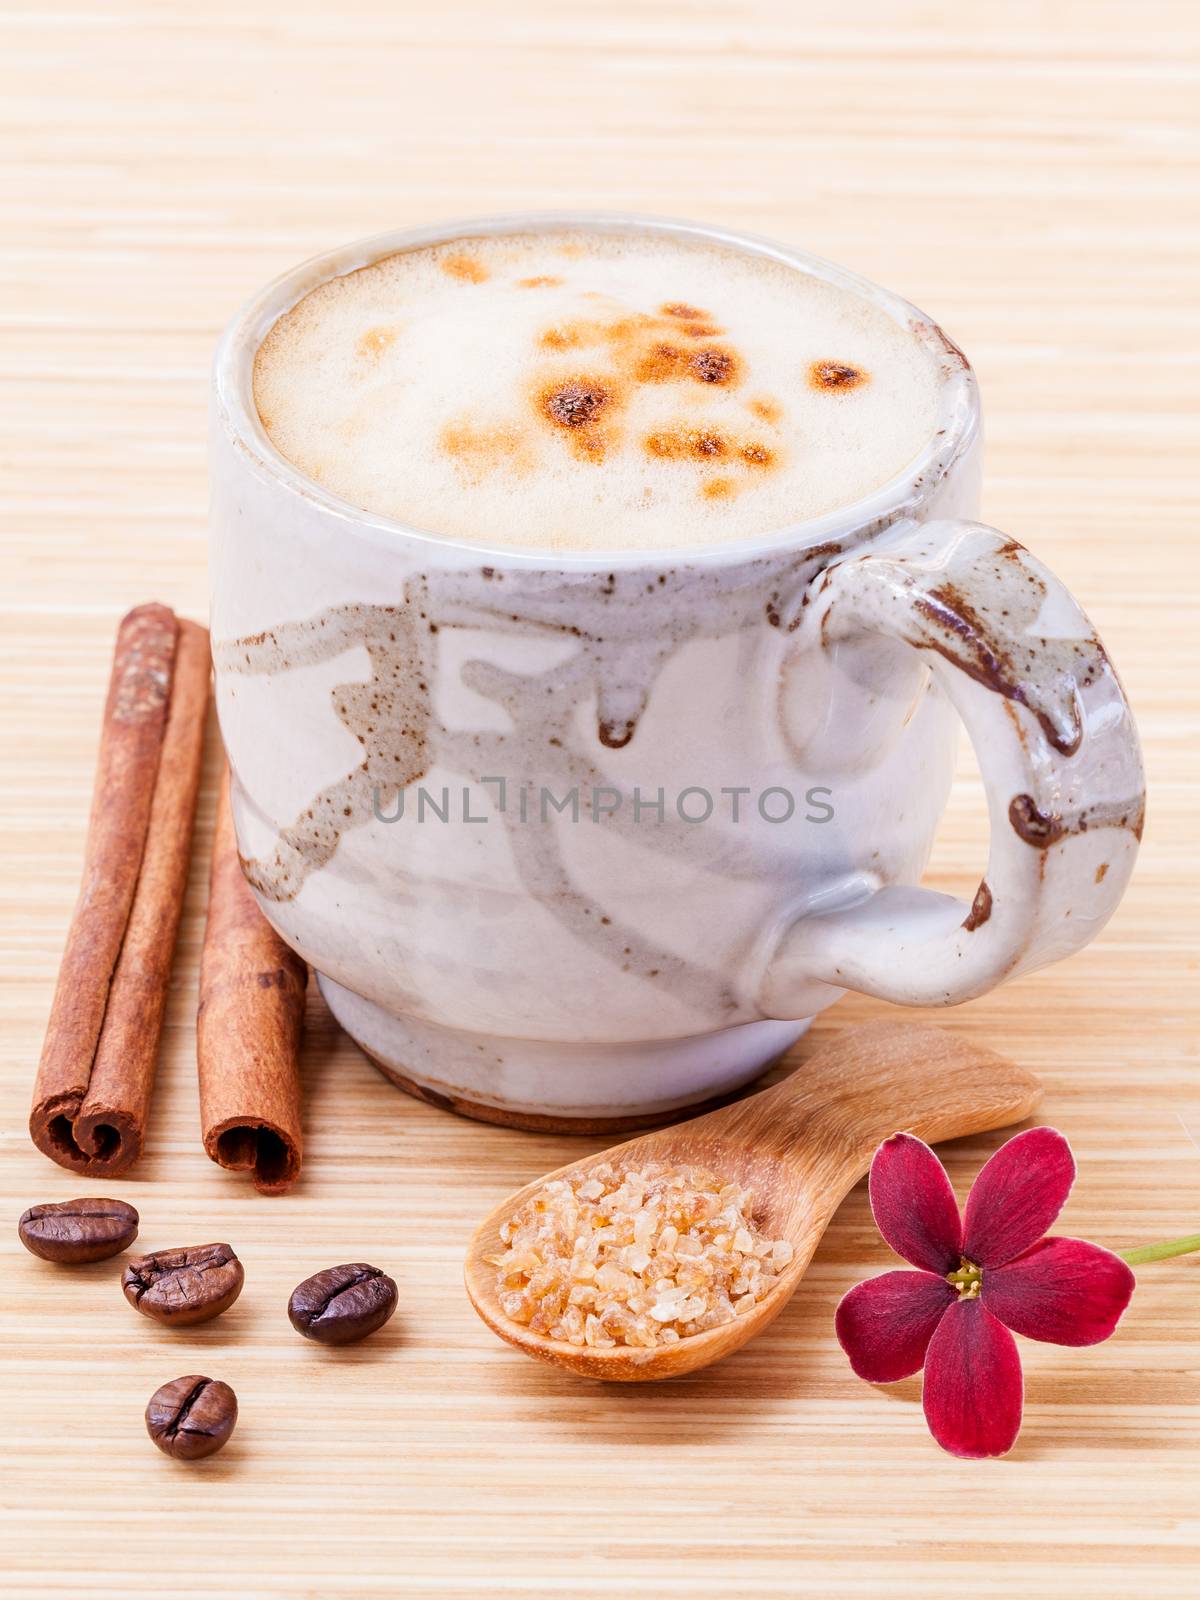 A cup of coffee on wooden background.